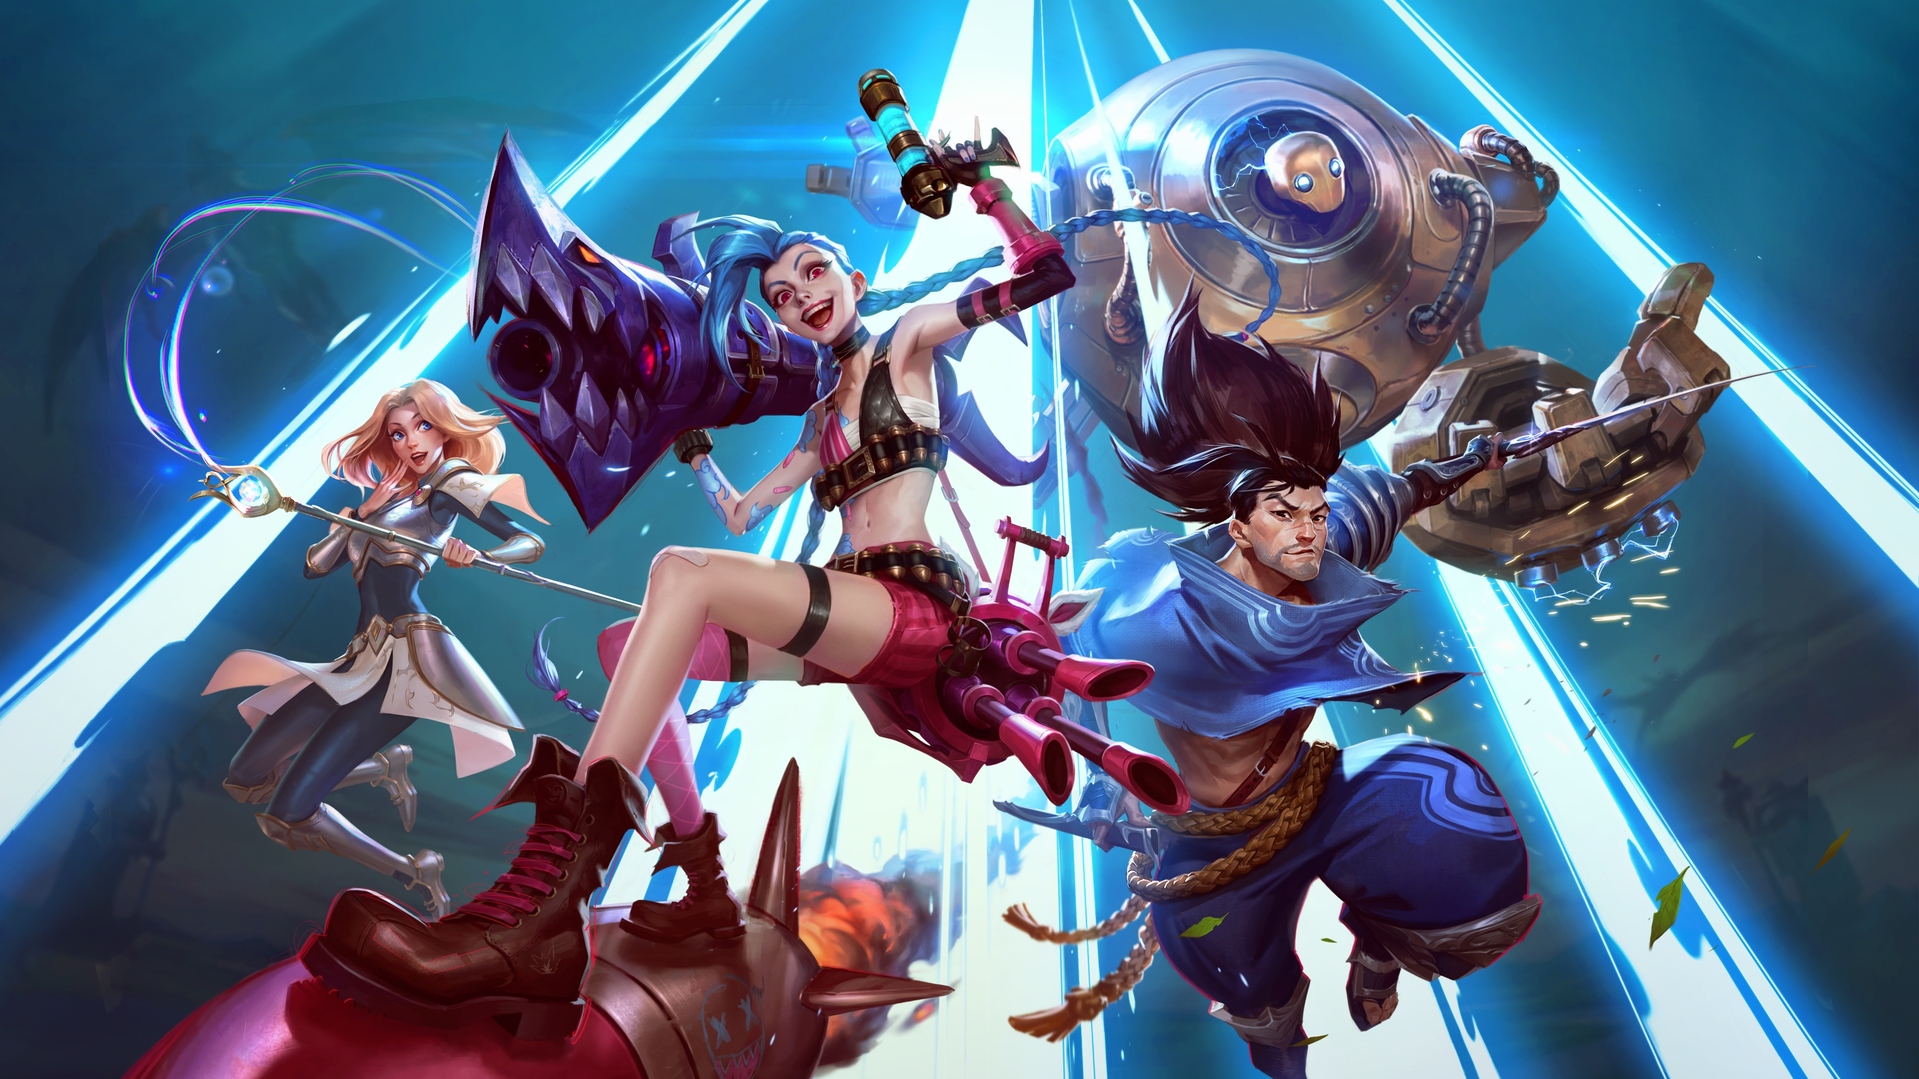 Why is League of Legends the most popular video game in the world?